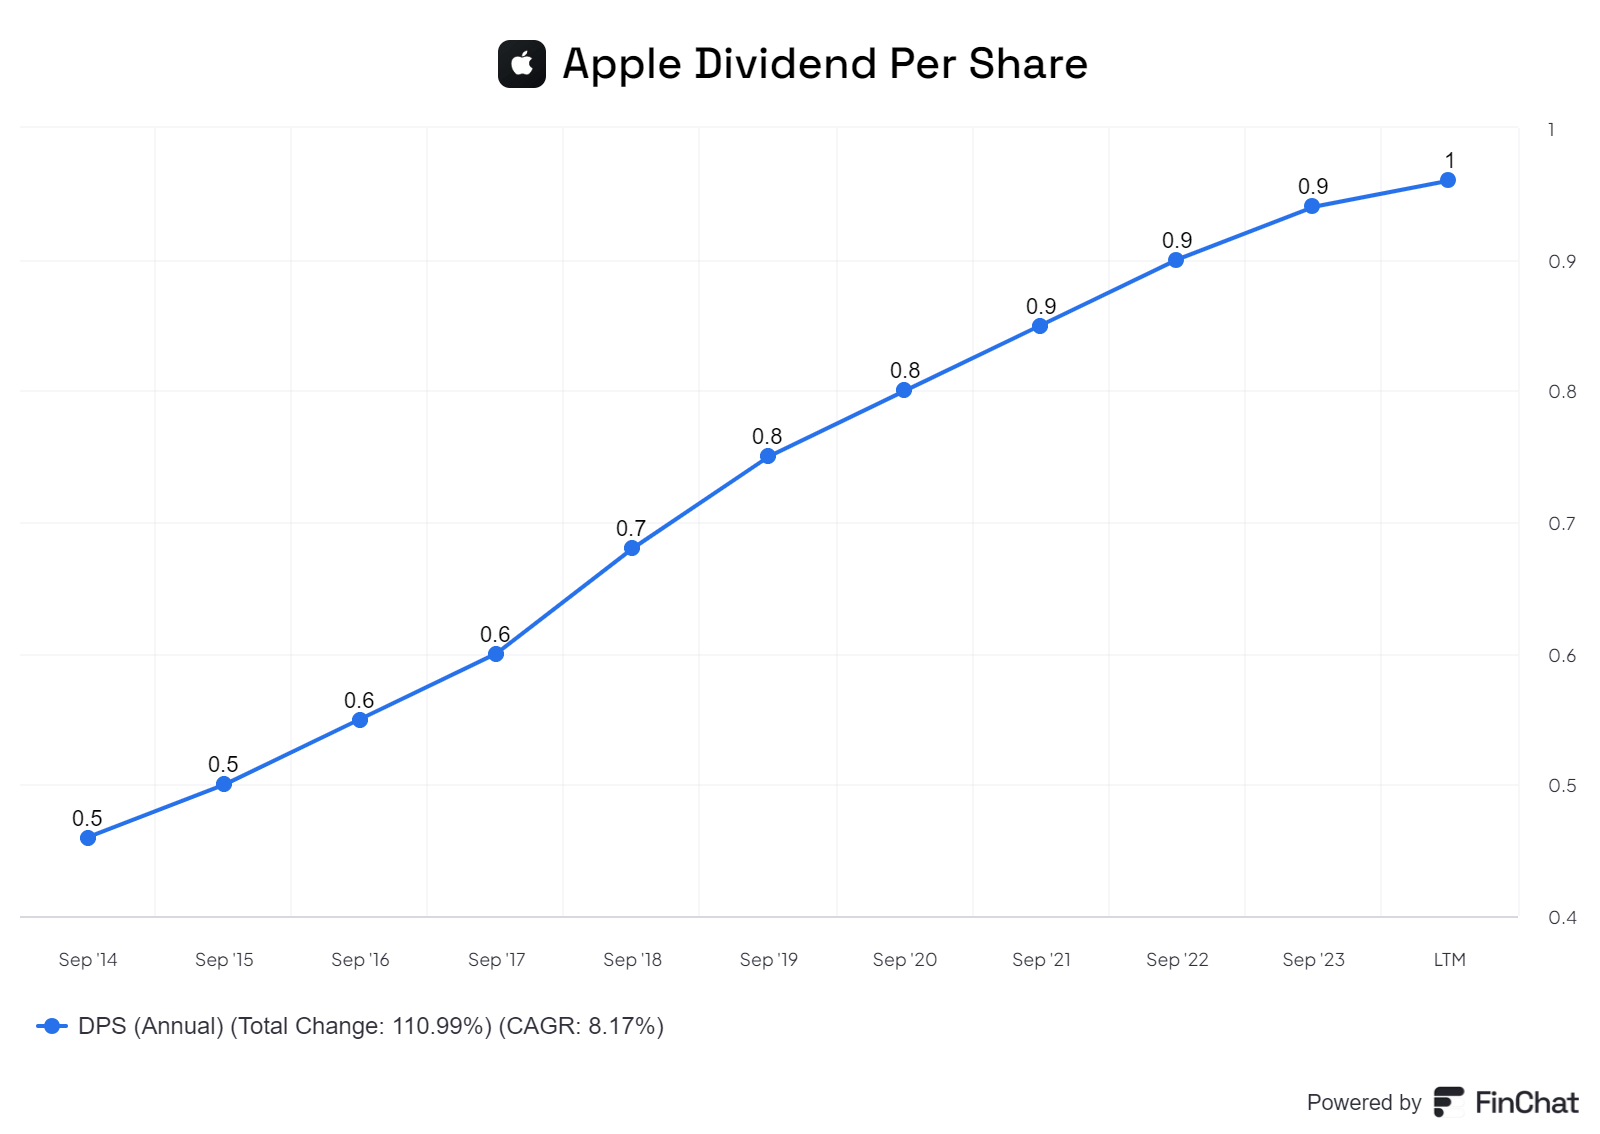 aapl dividend per share over time